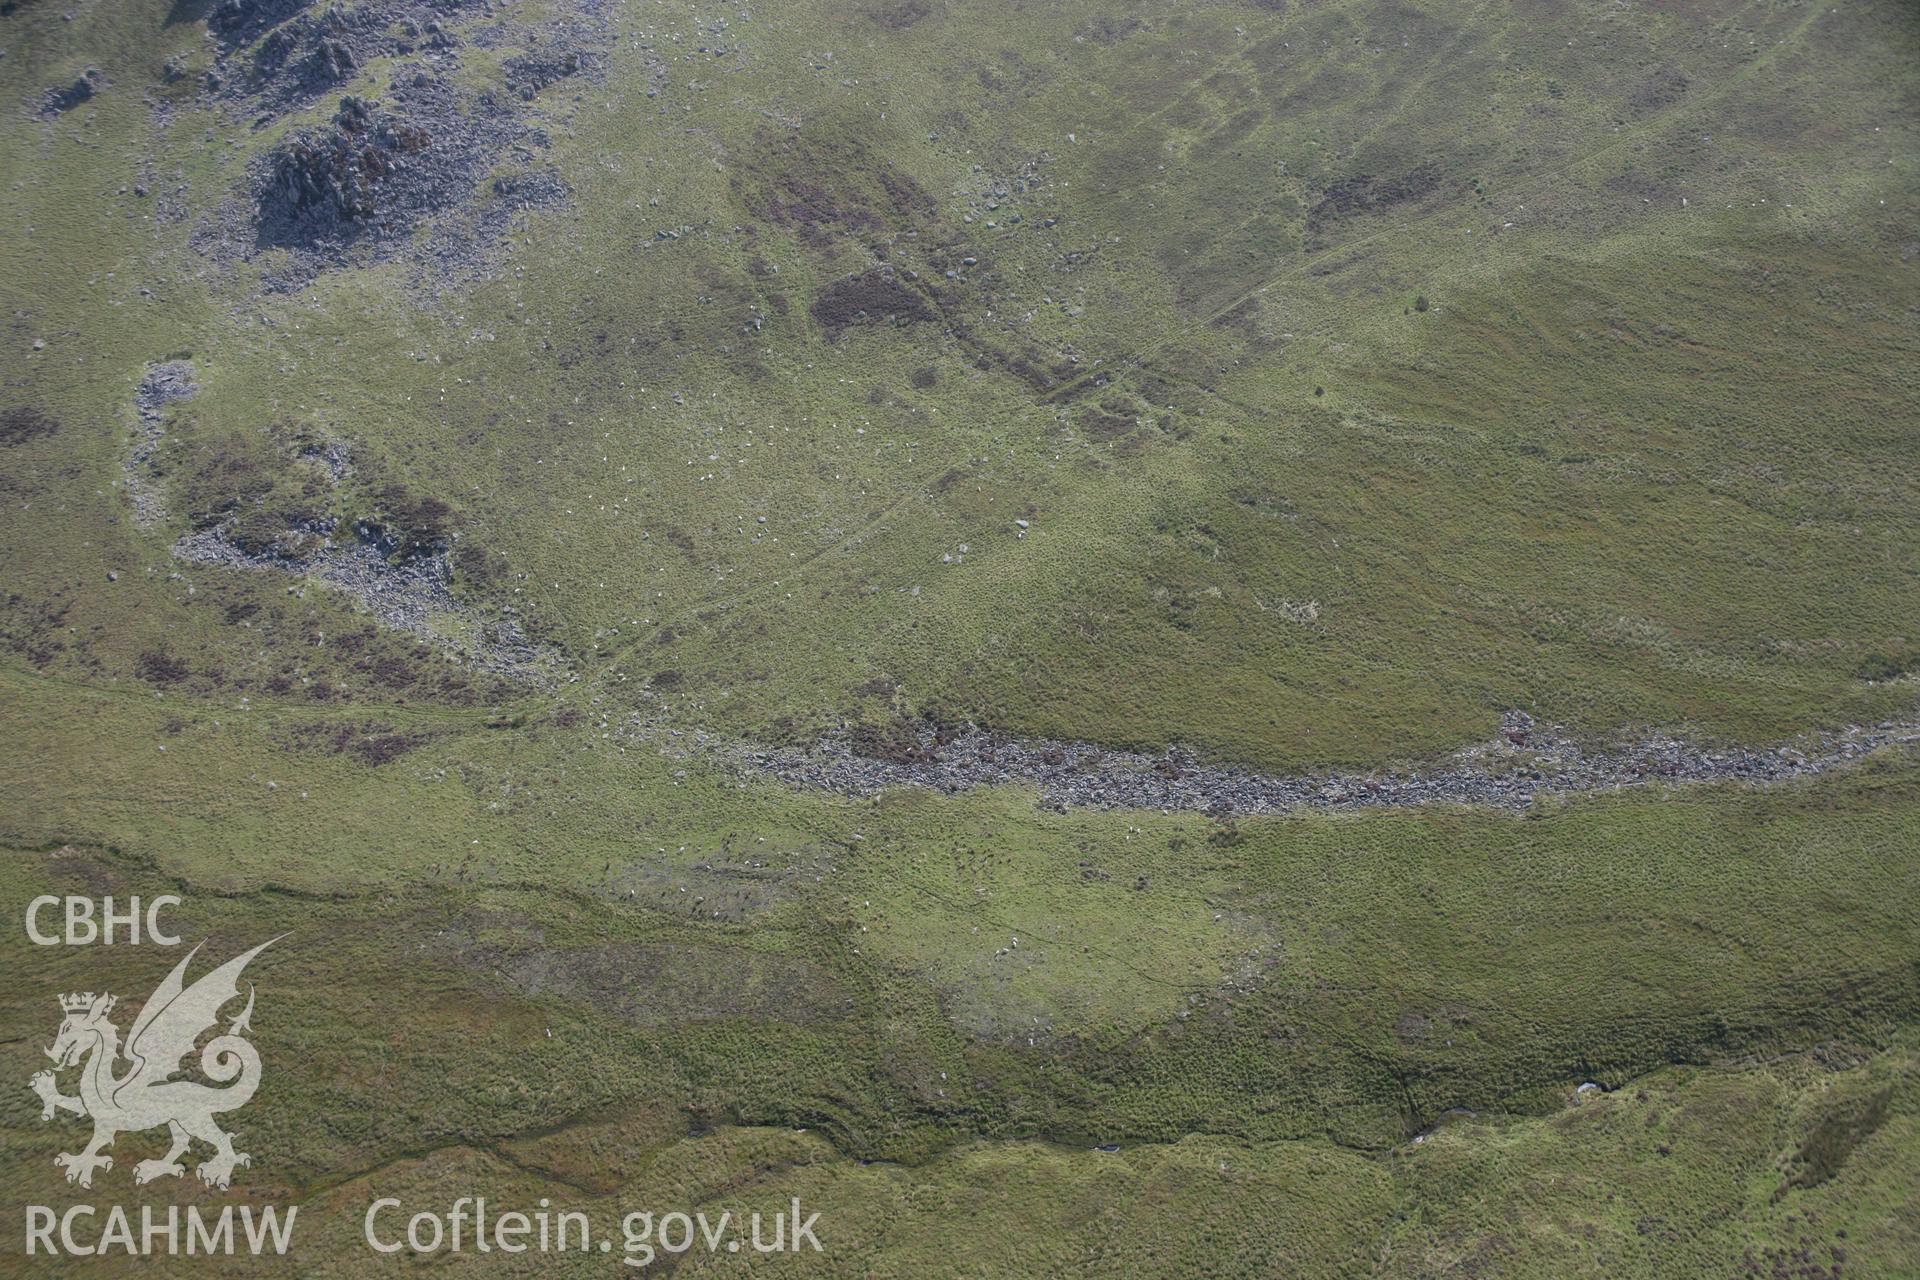 RCAHMW colour oblique photograph of Carn Menyn Cairn, showing 'stone river' below. Taken by Toby Driver on 11/09/2007.